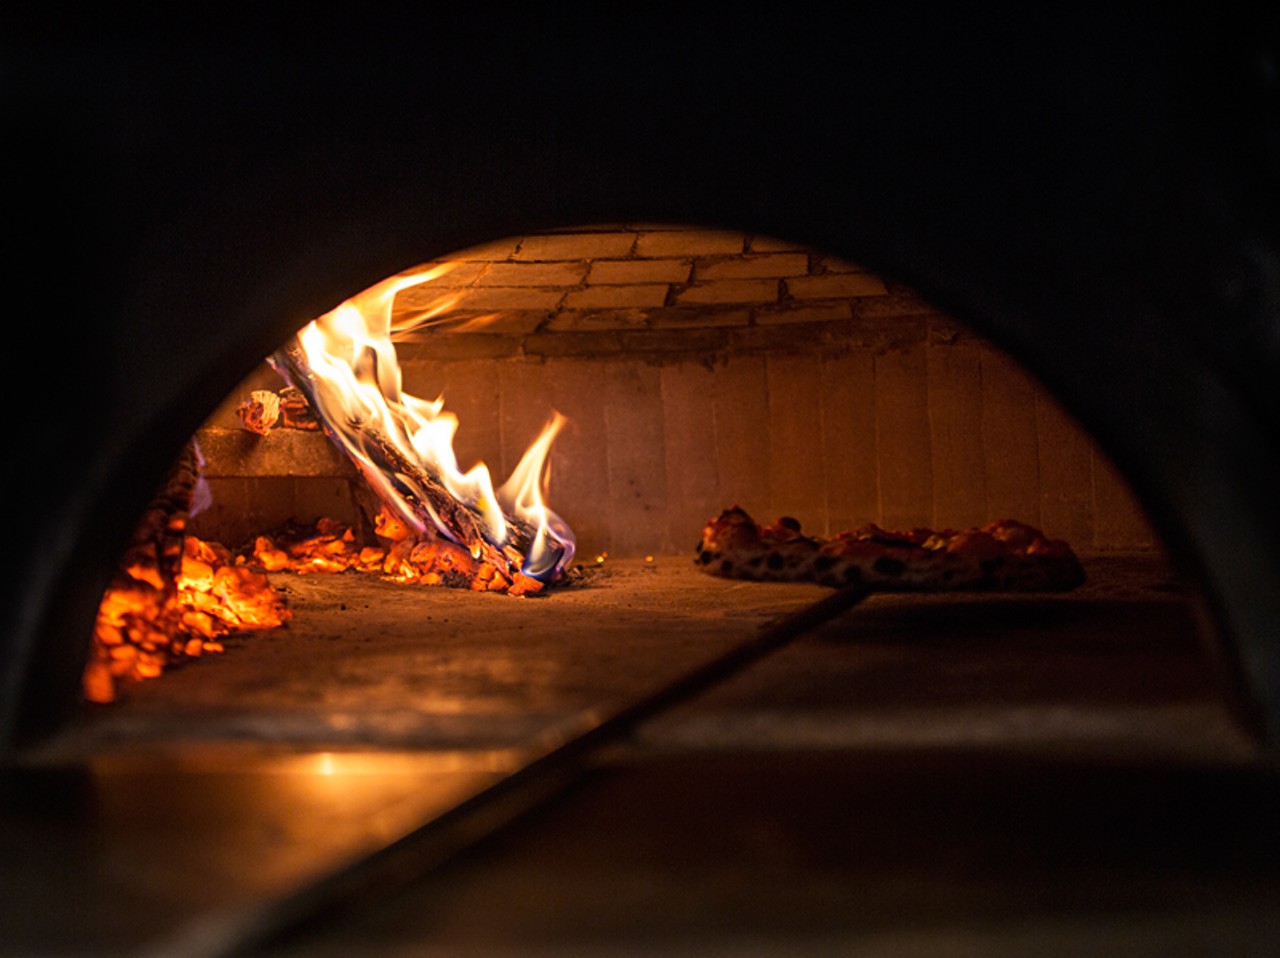 Inside the brick pizza oven at the Good Pie.